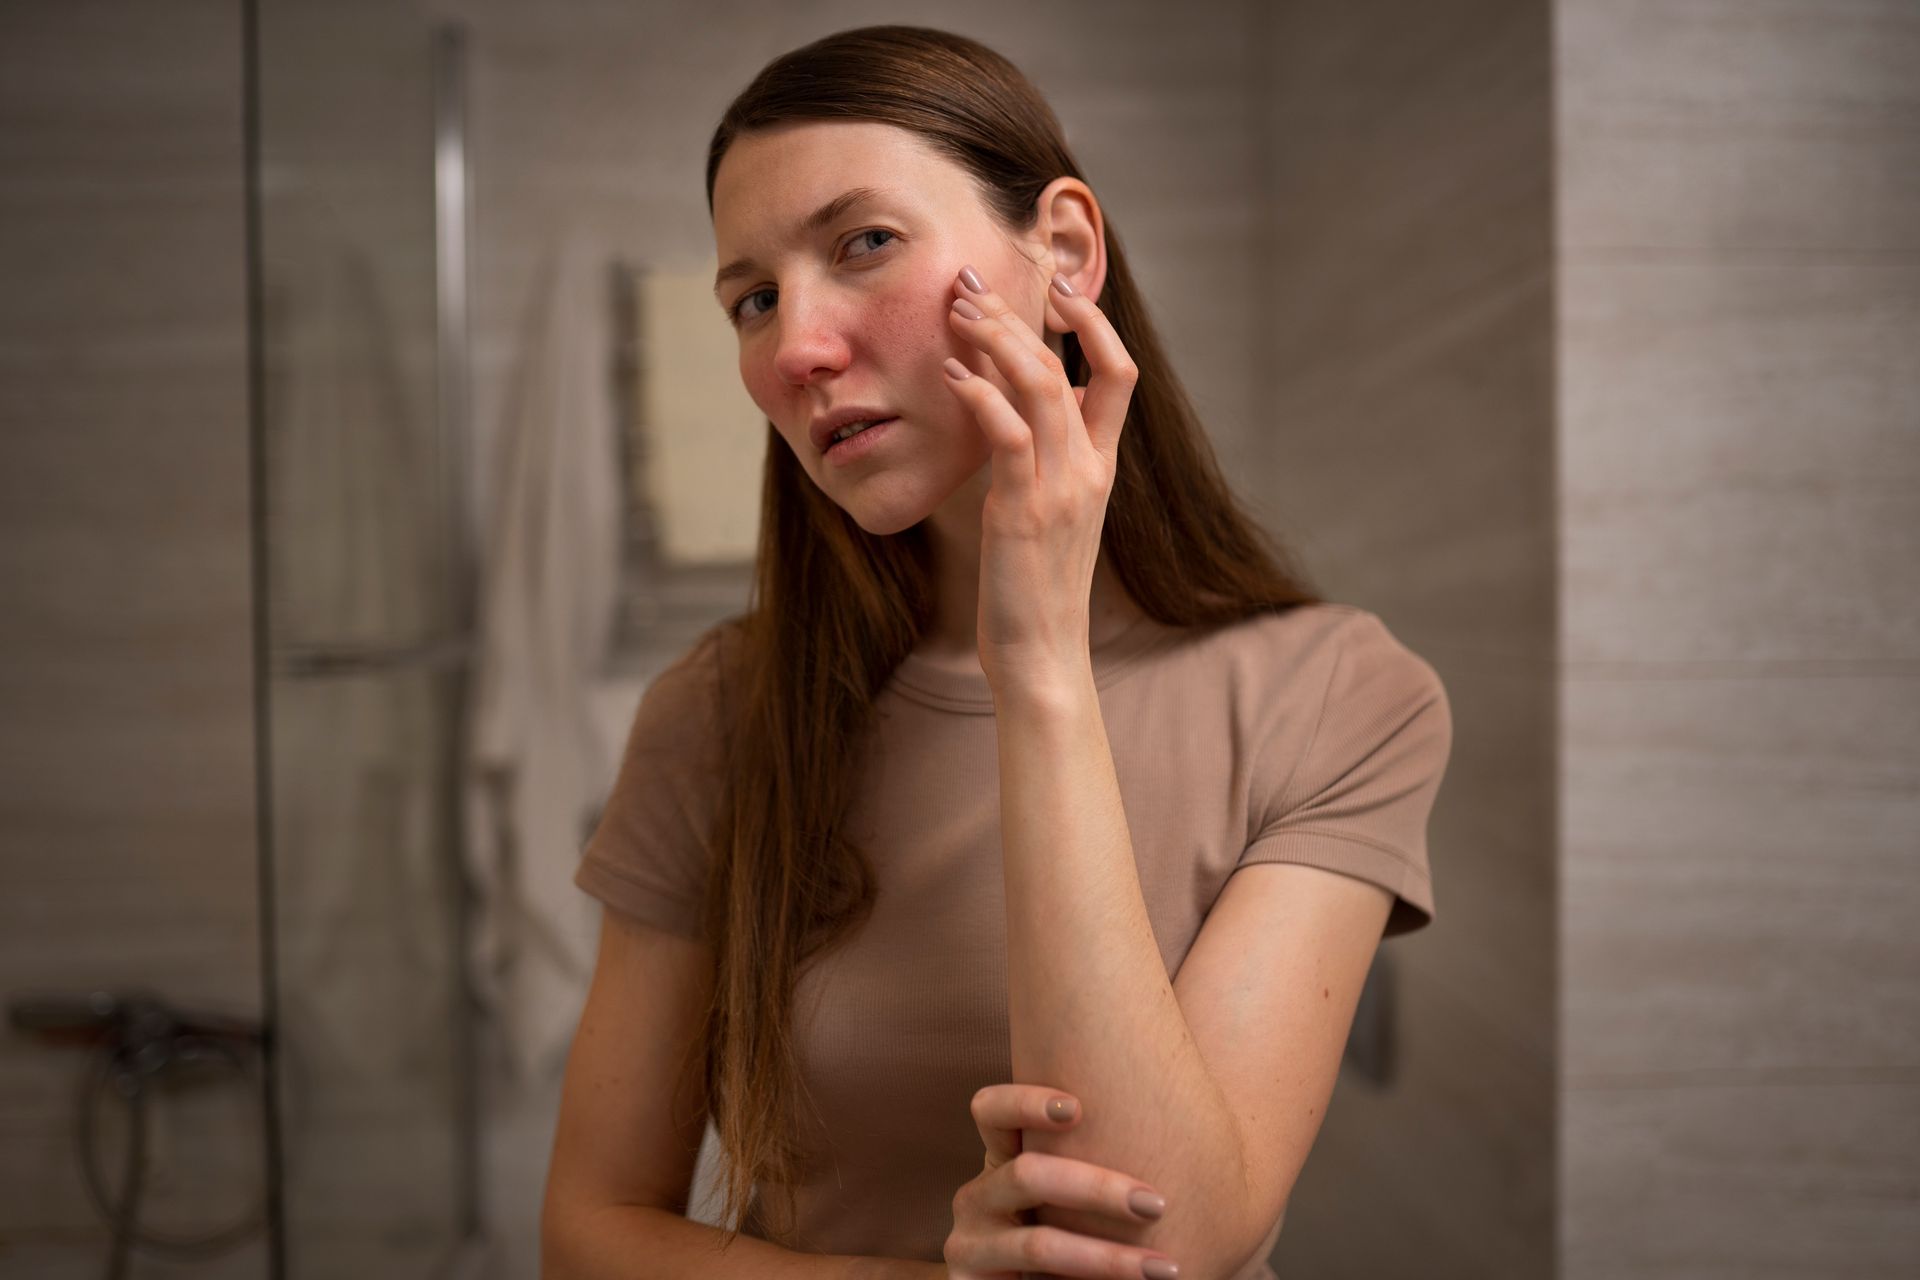 a woman touches her face in front of a mirror